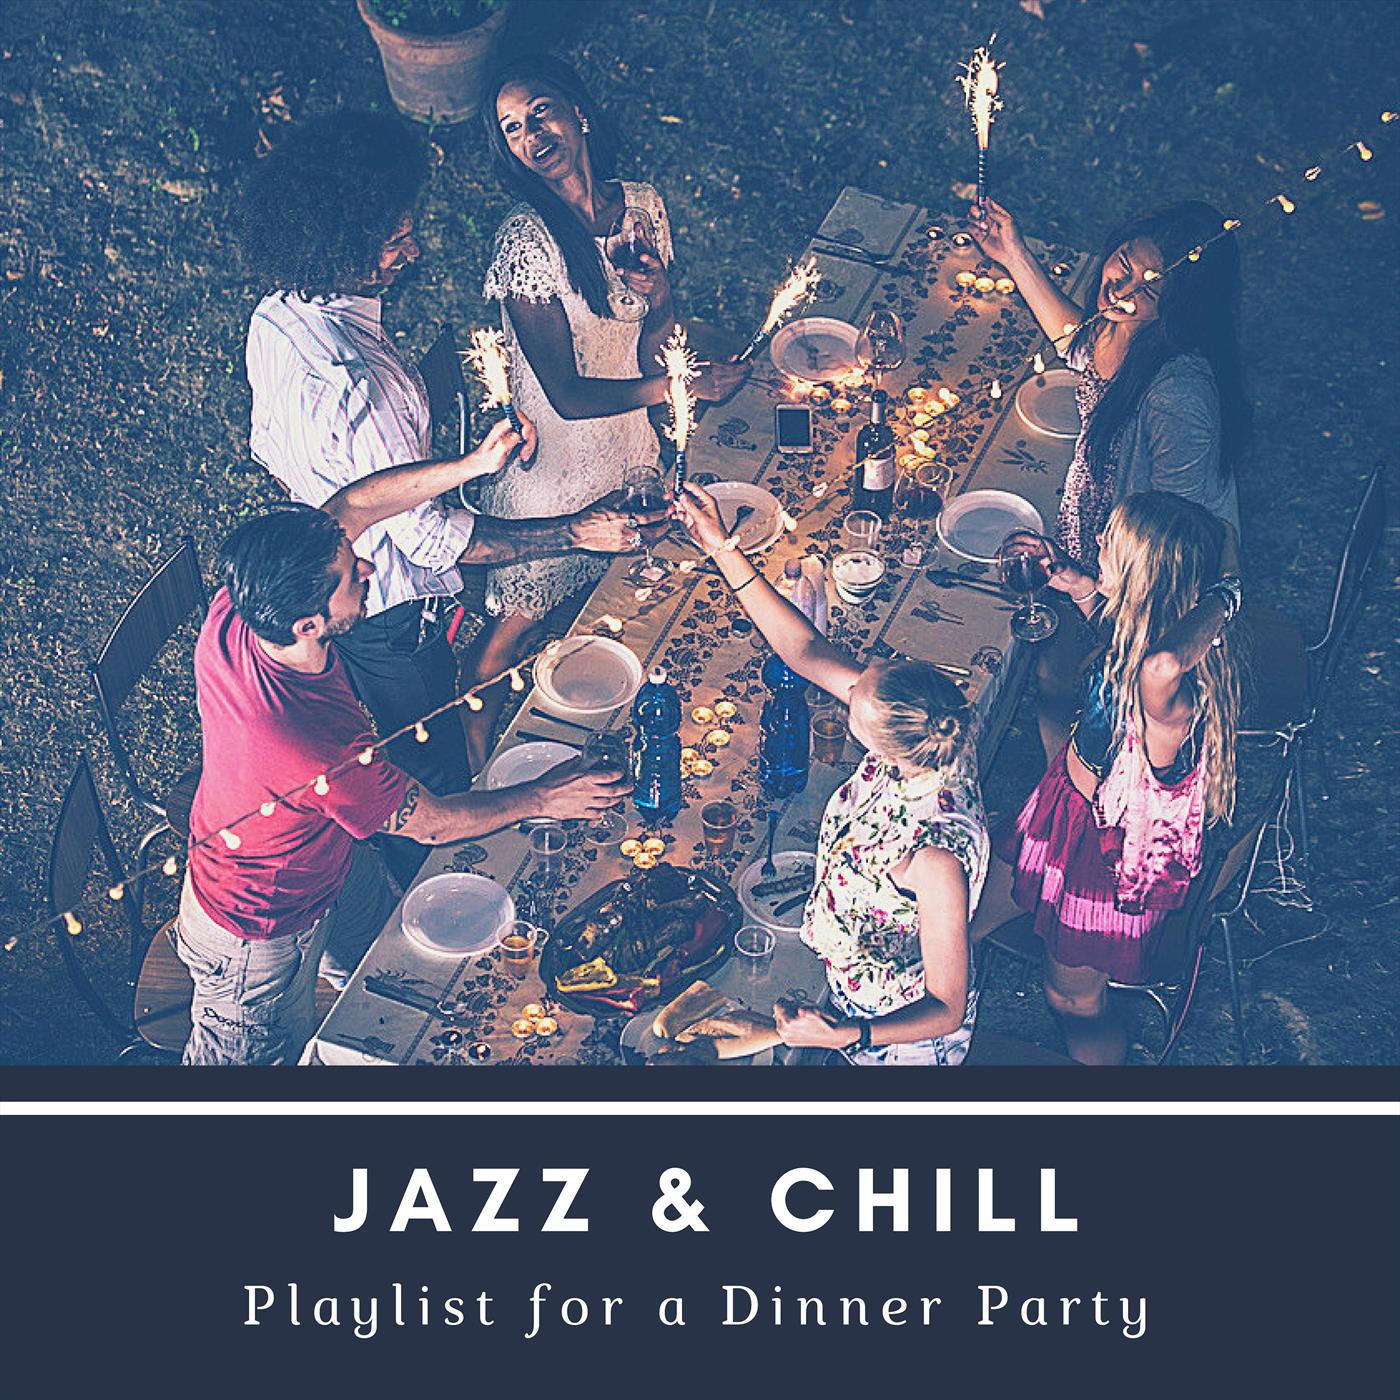 Jazz and Chill Playlist for a Dinner Party